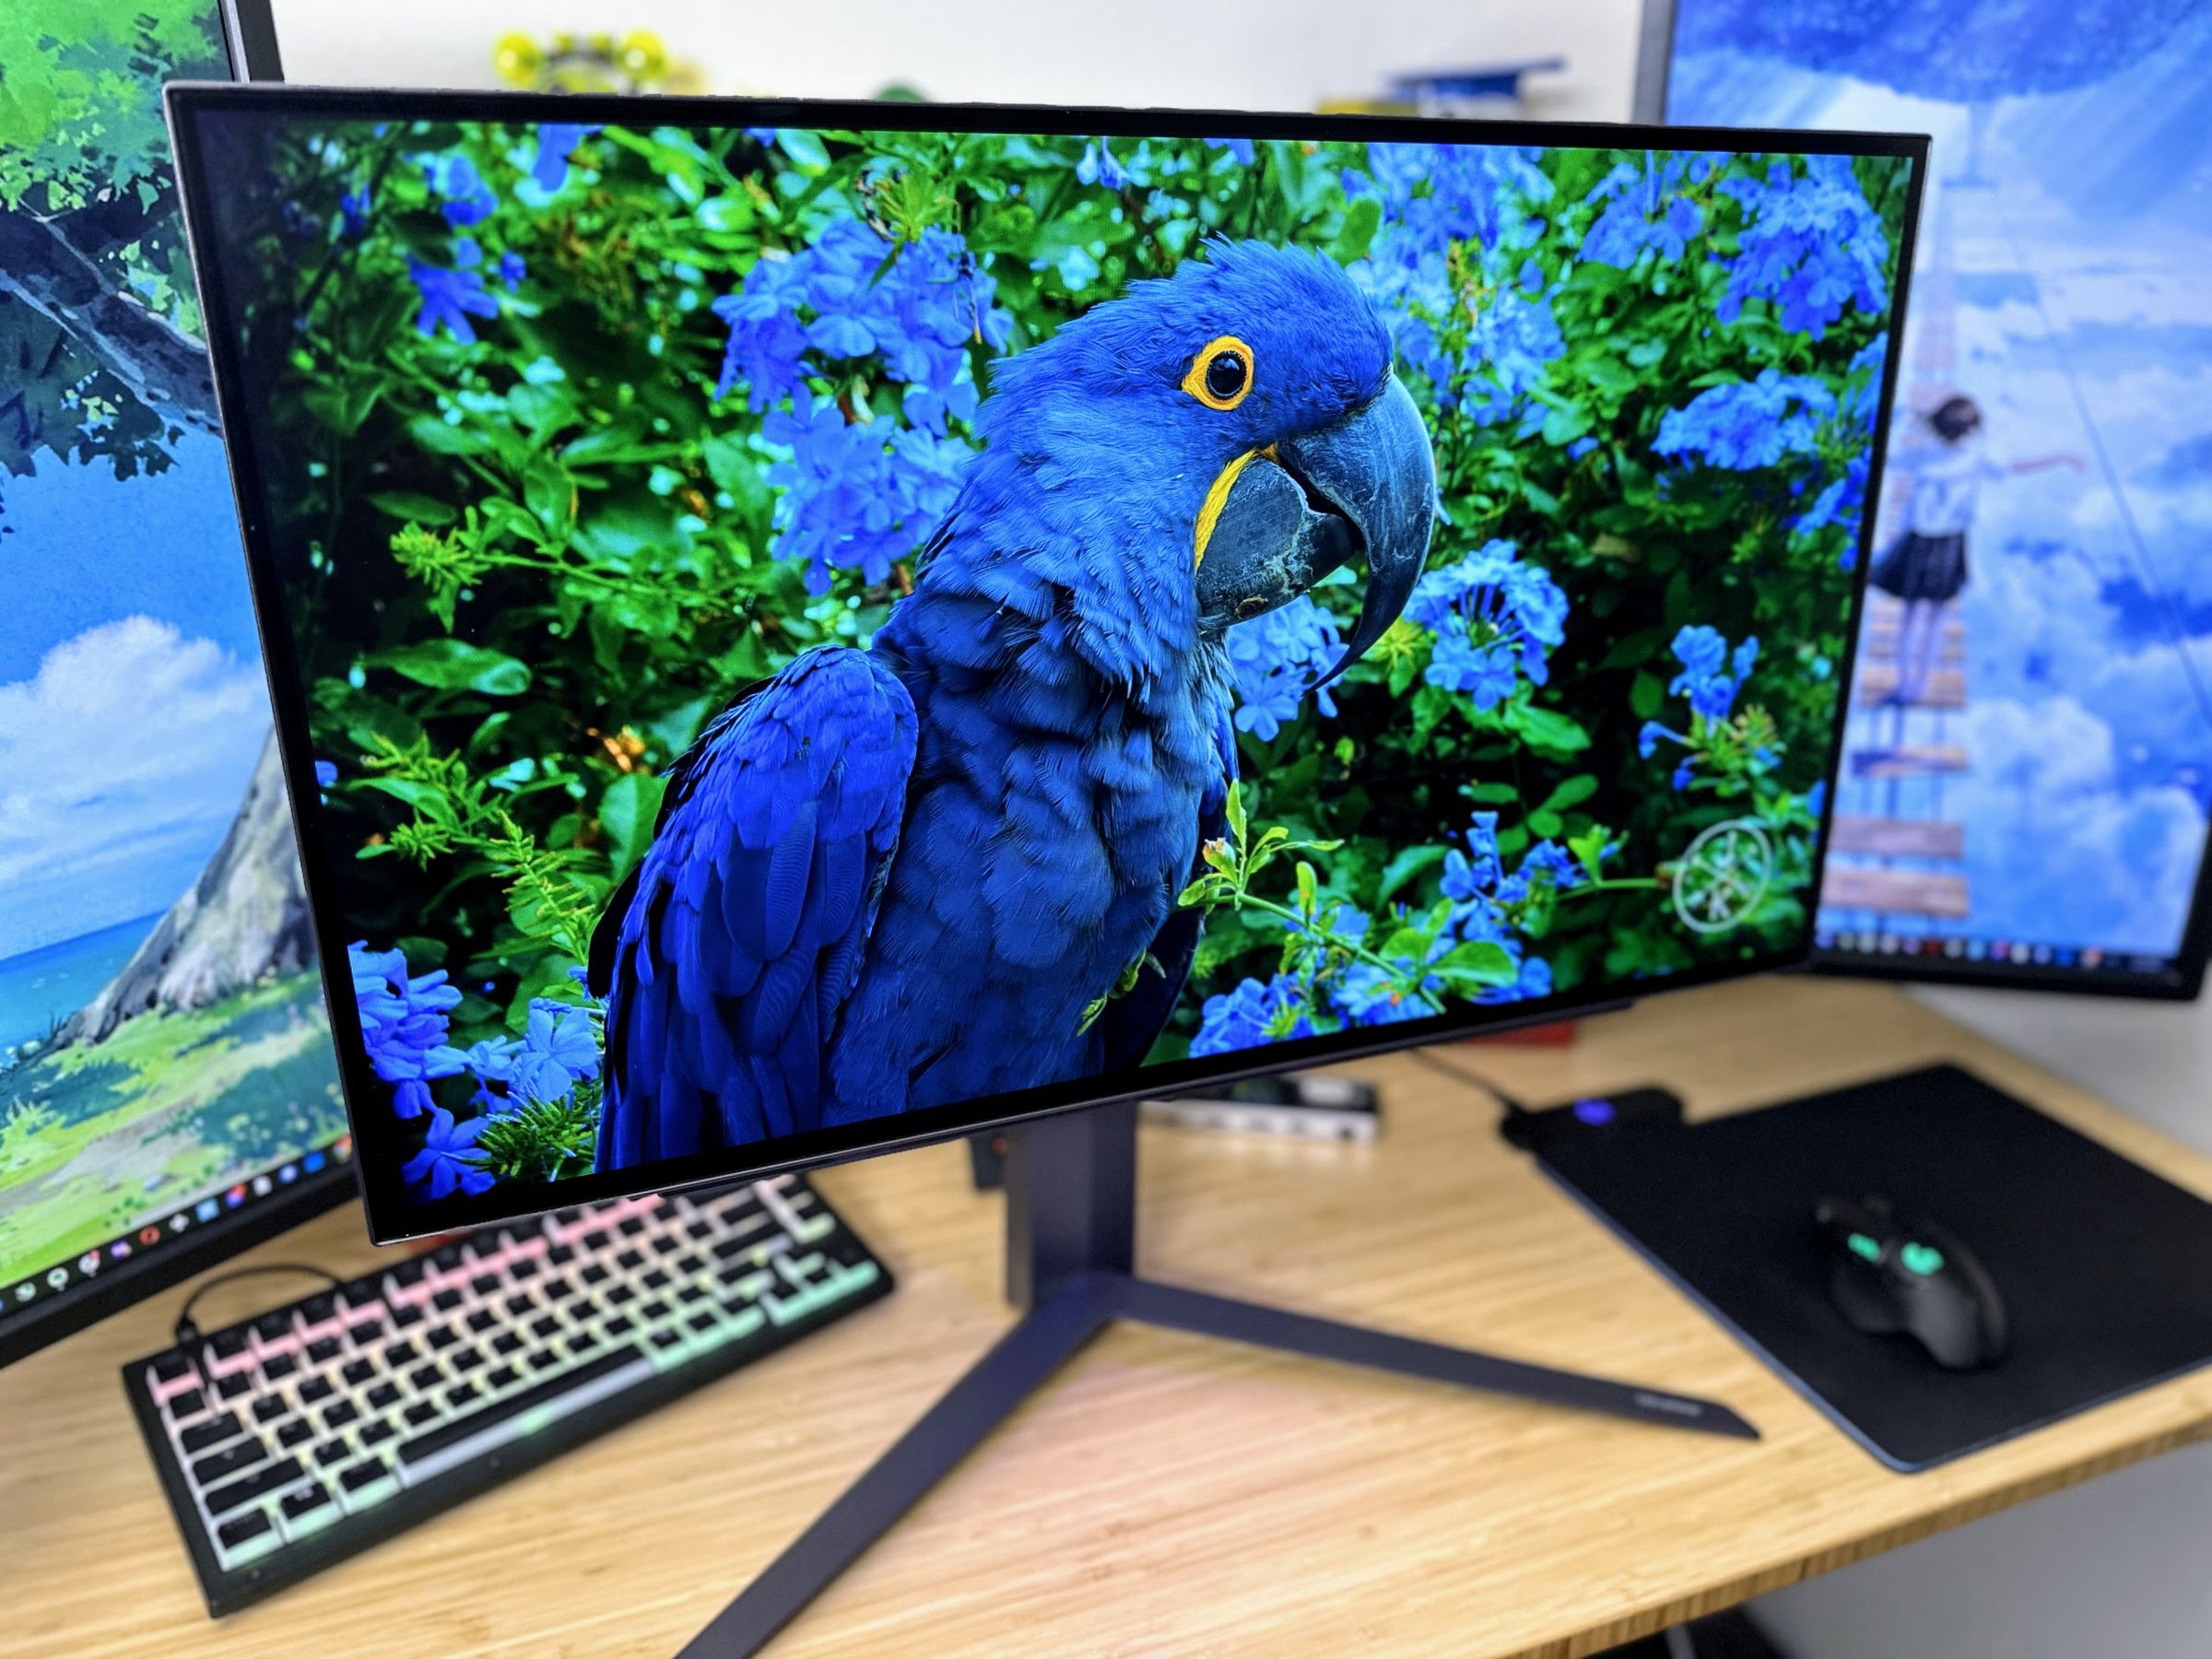 Another image of LG’s 27-inch gaming OLED.